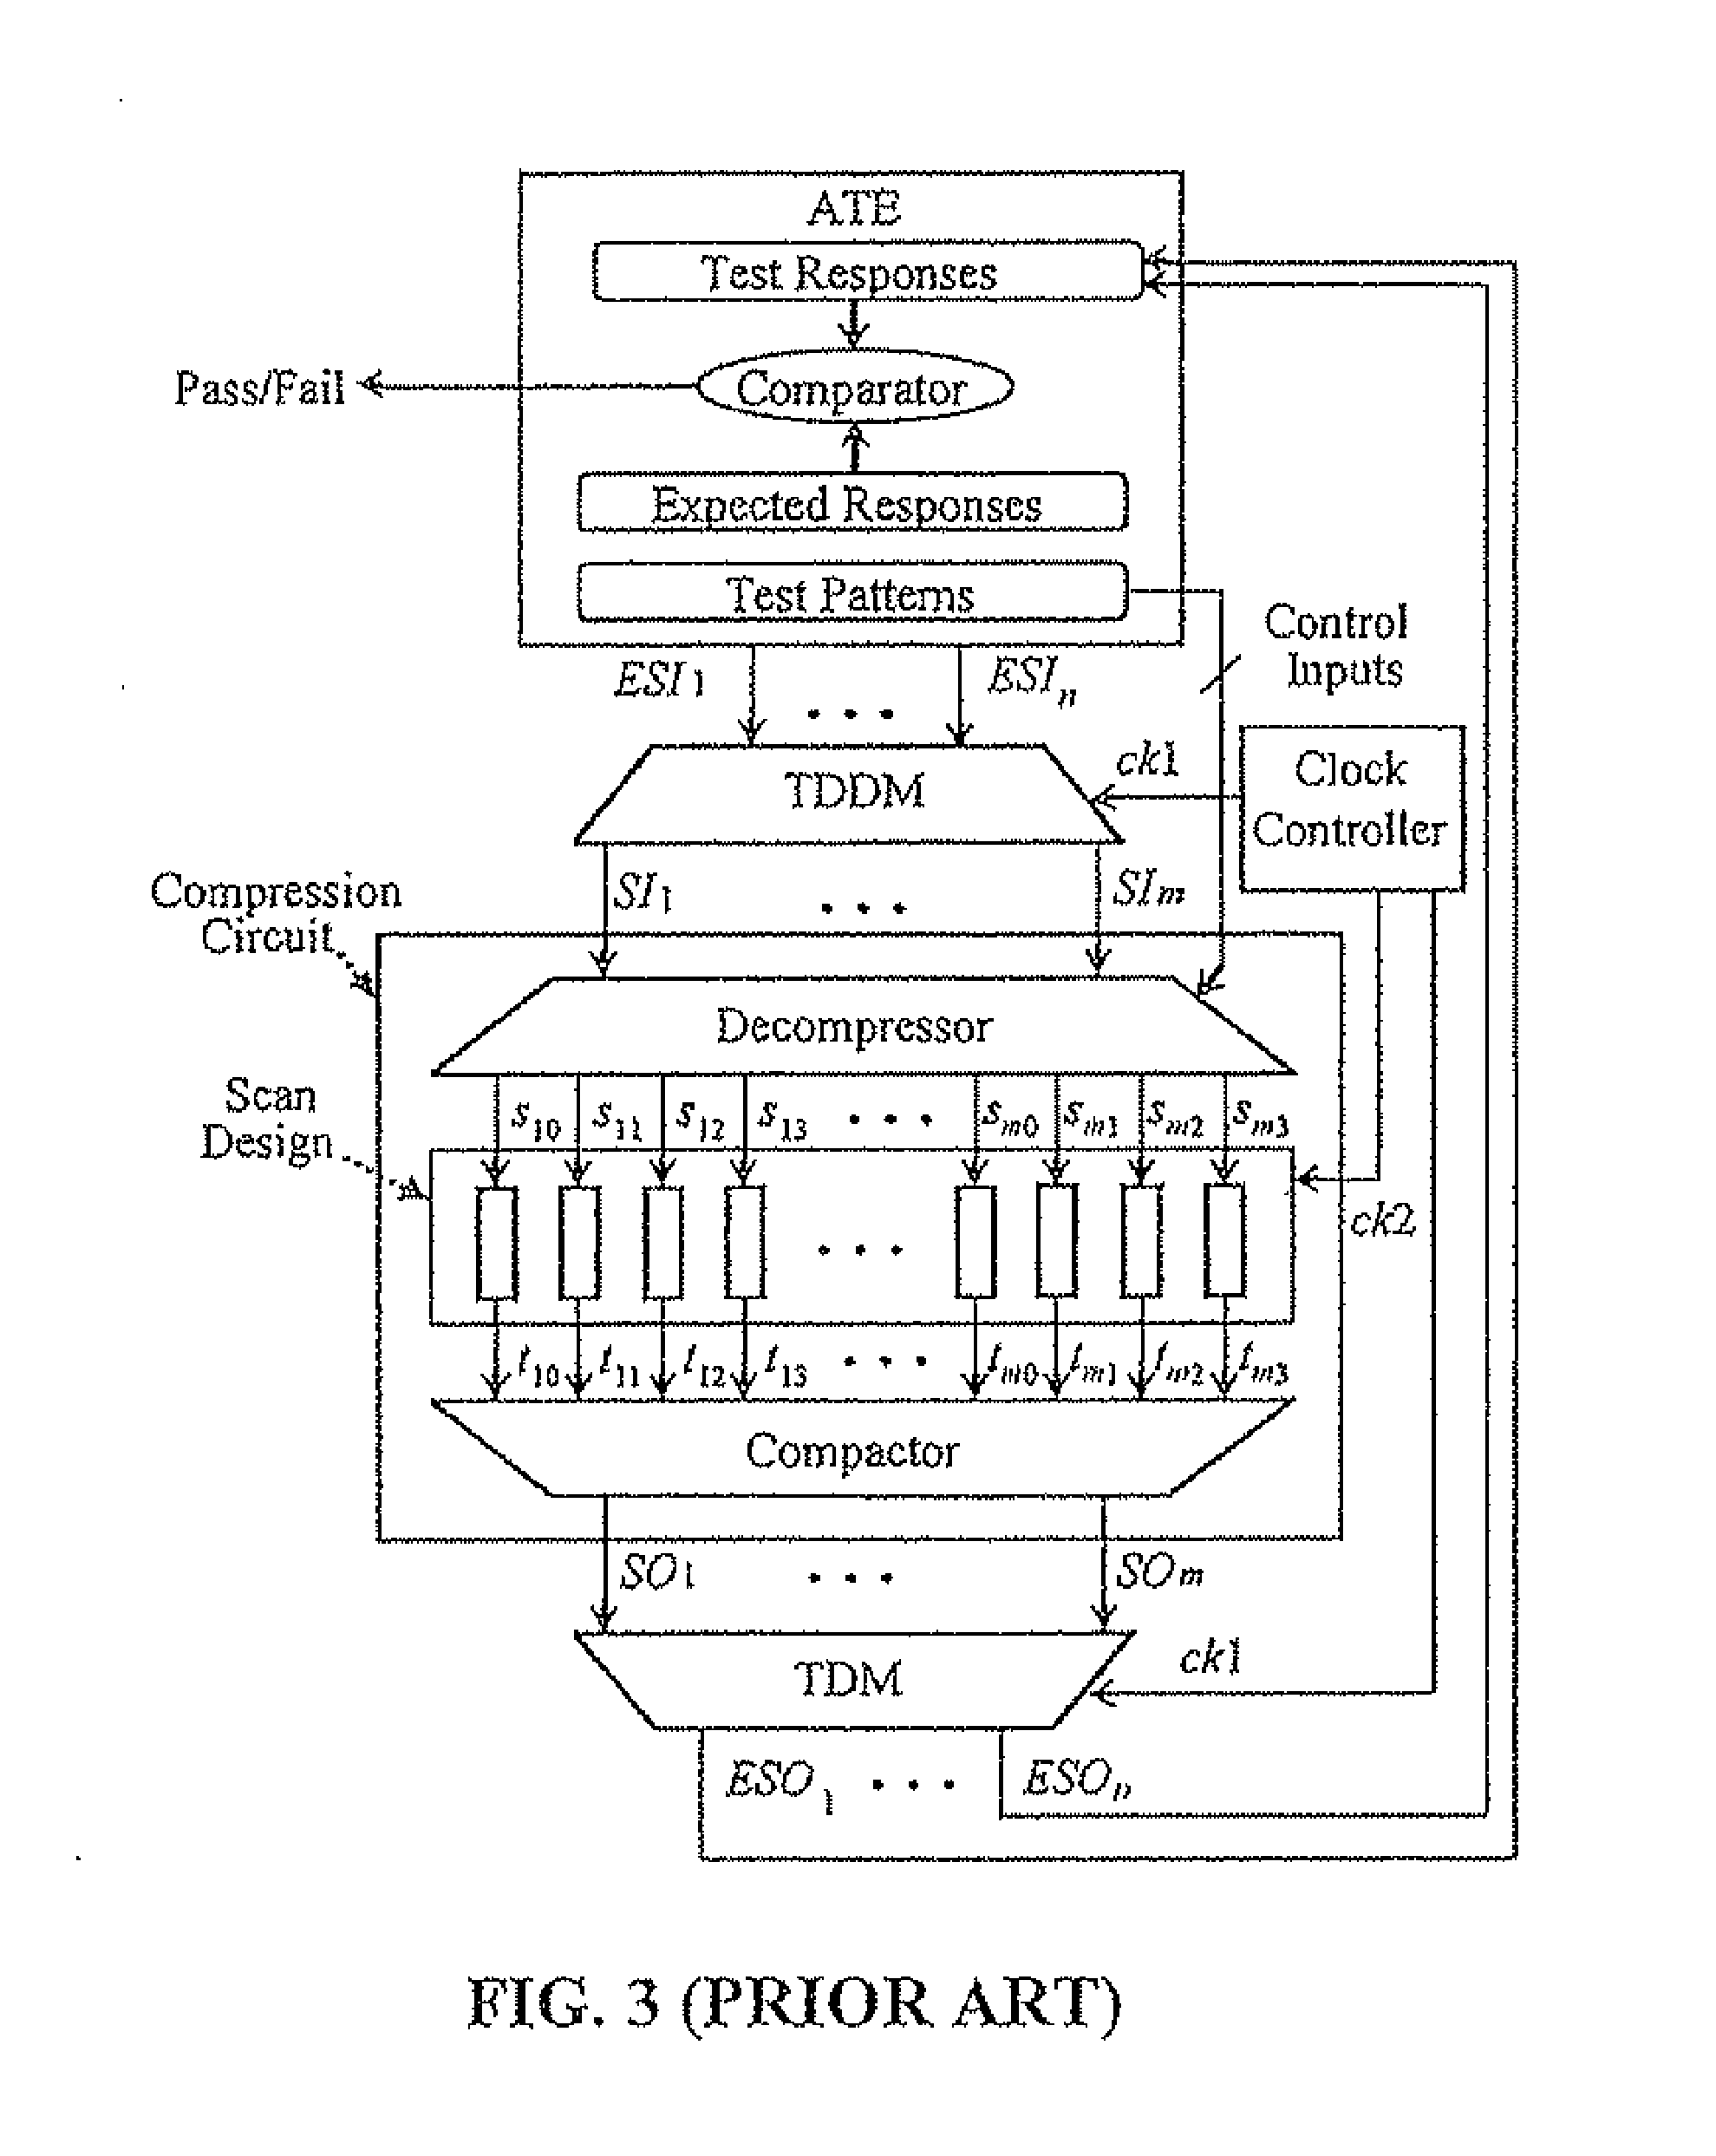 Method and apparatus for testing 3D integrated circuits